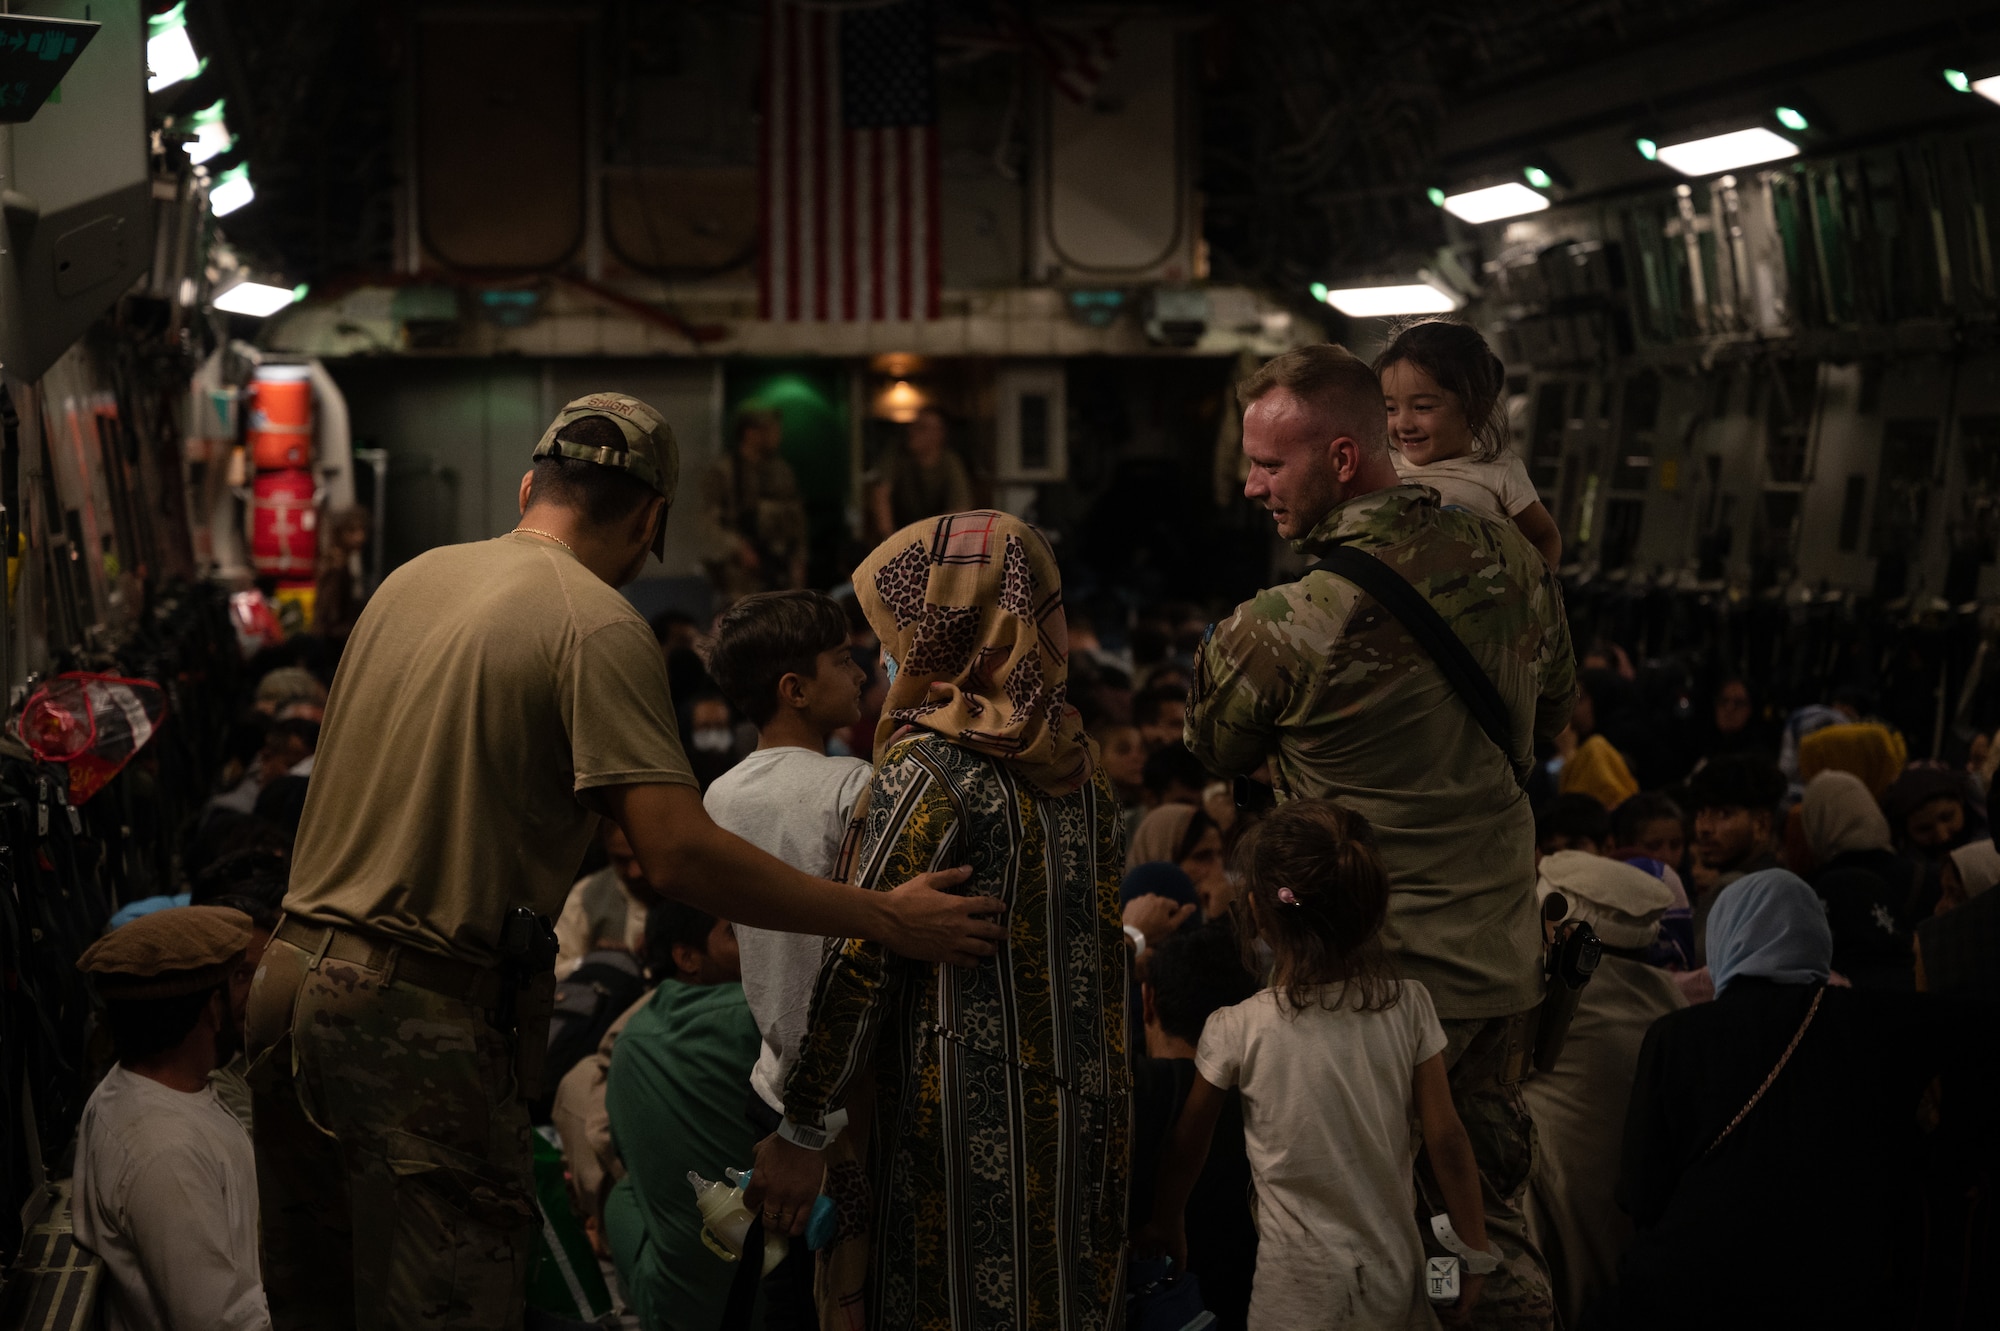 A U.S. Air Force Airman assists an Afghan citizen aboard a C-17 Globemaster III during Operation Allies Refuge, Aug. 19, 2021. Approximately 124,000 Afghan citizens were evacuated from Kabul, Afghanistan, during OAR, one of the largest air evacuations of civilians in American history. (U.S. Air Force photo by Staff Sgt. Brandon Cribelar)